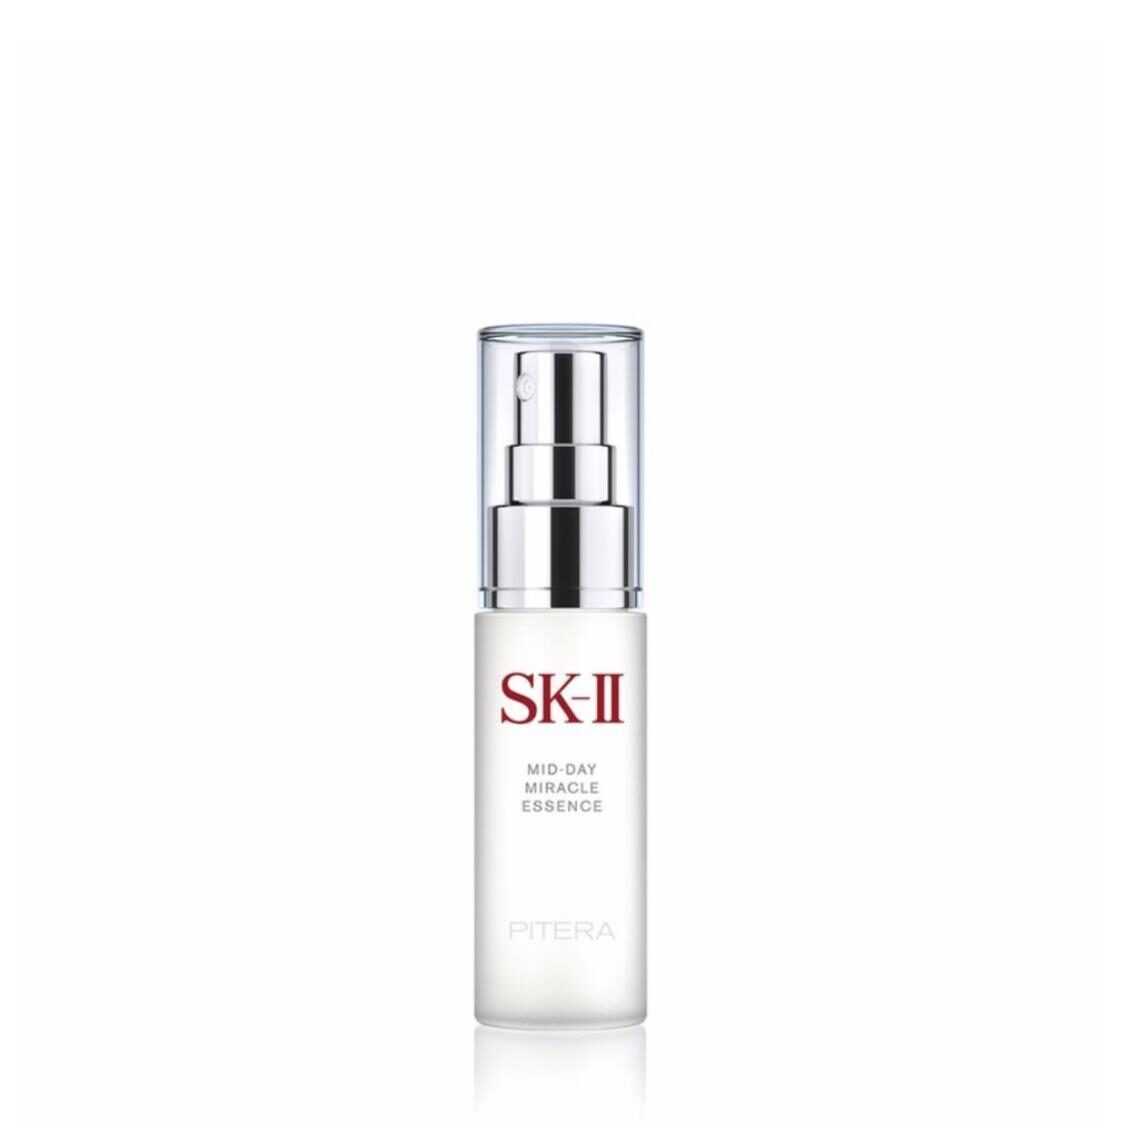 SK-II Mid-Day Miracle Essence 50ml